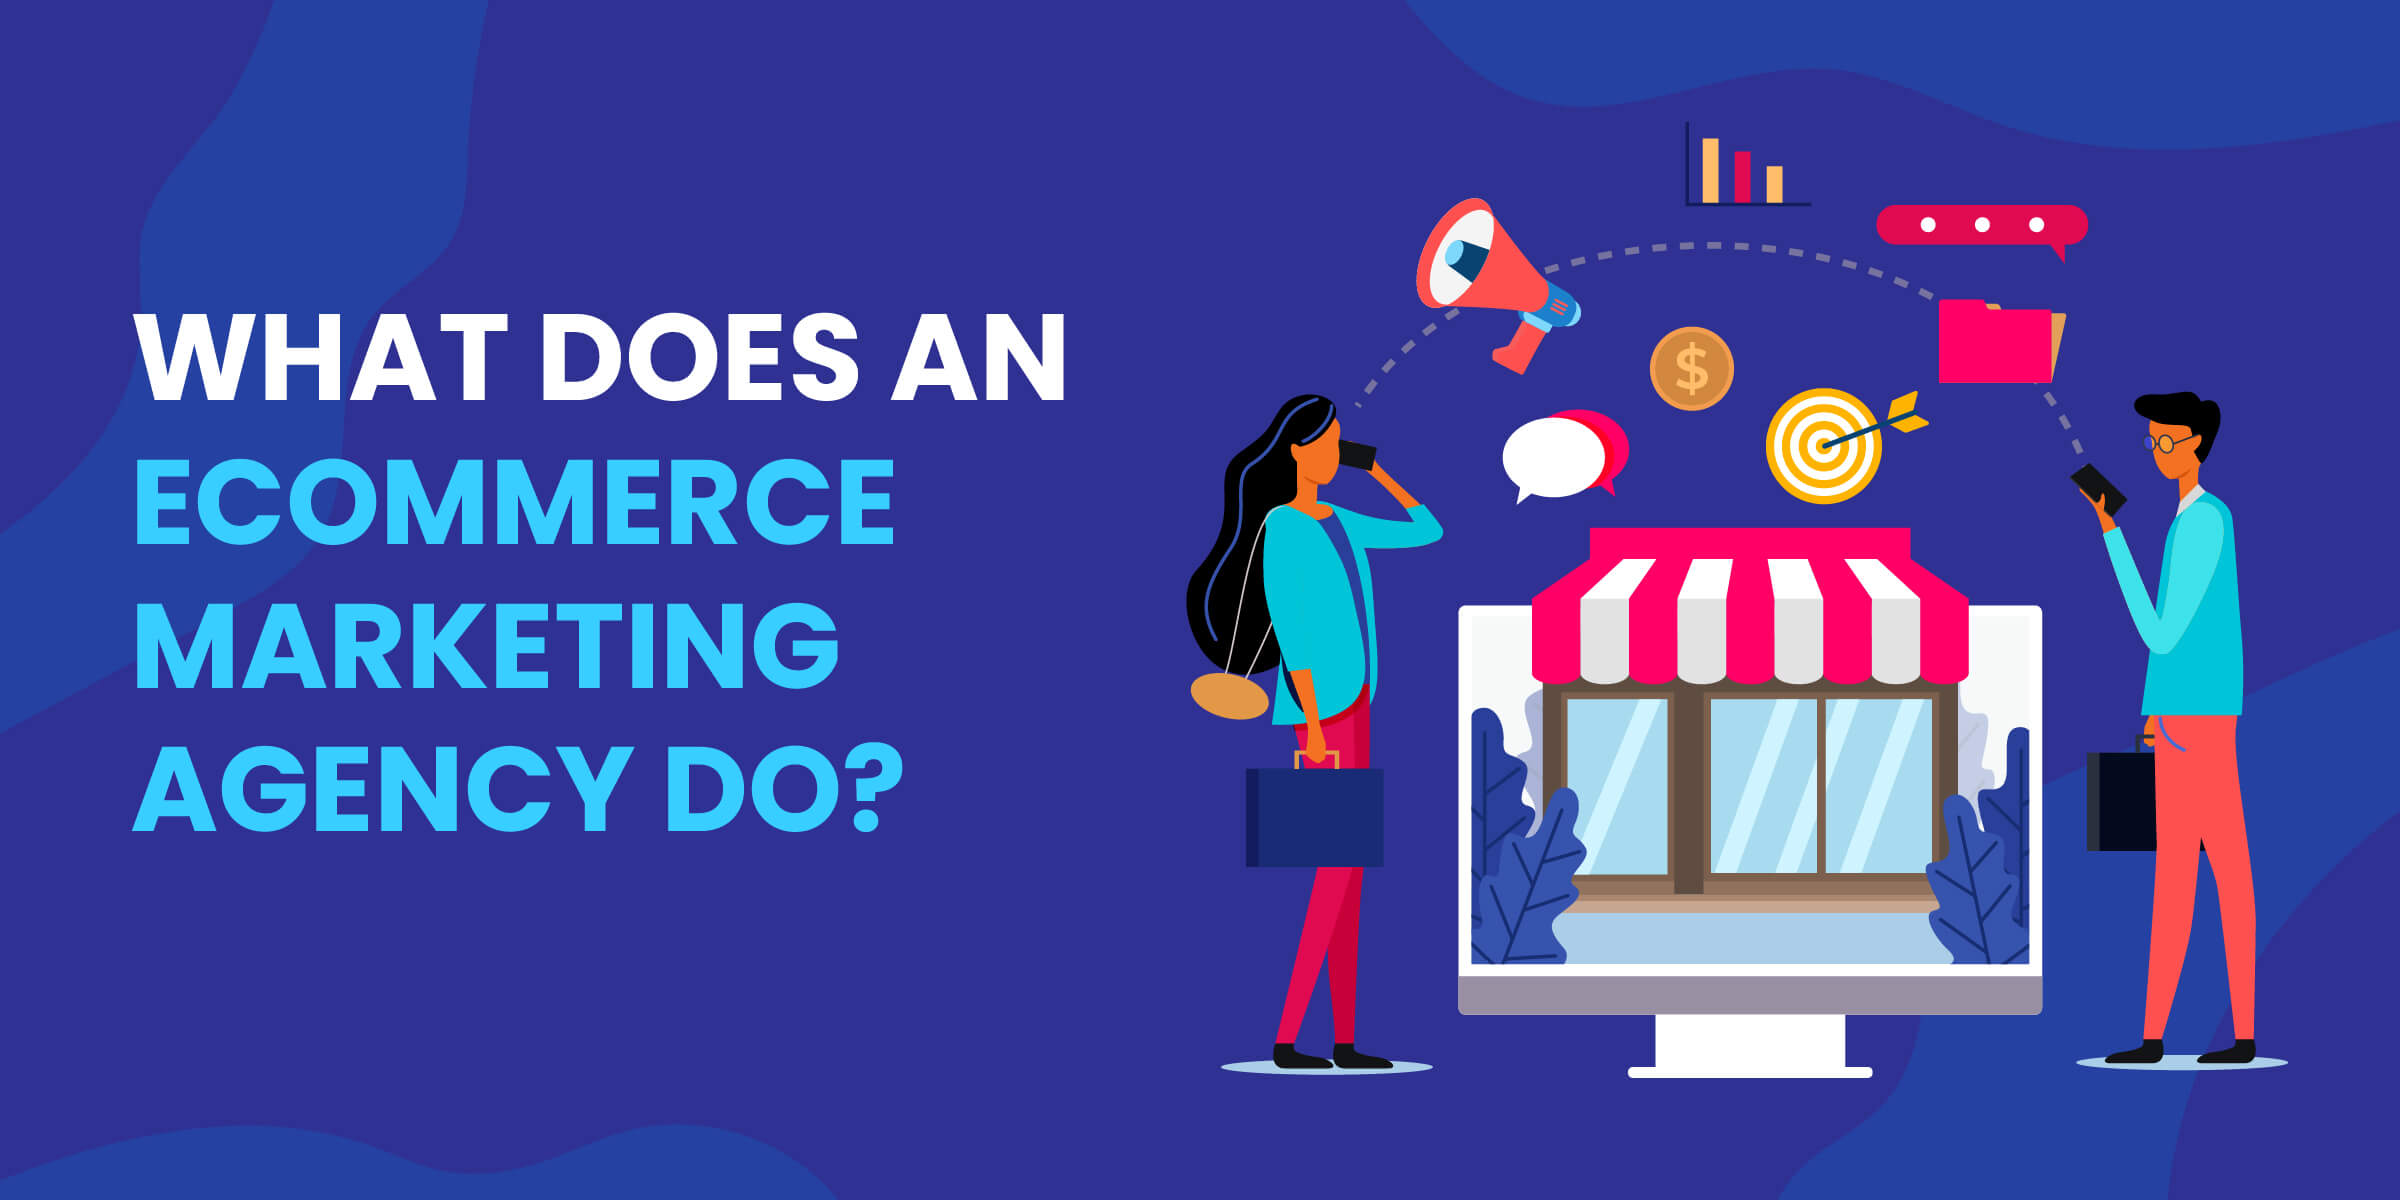 What Does an eCommerce Agency Do